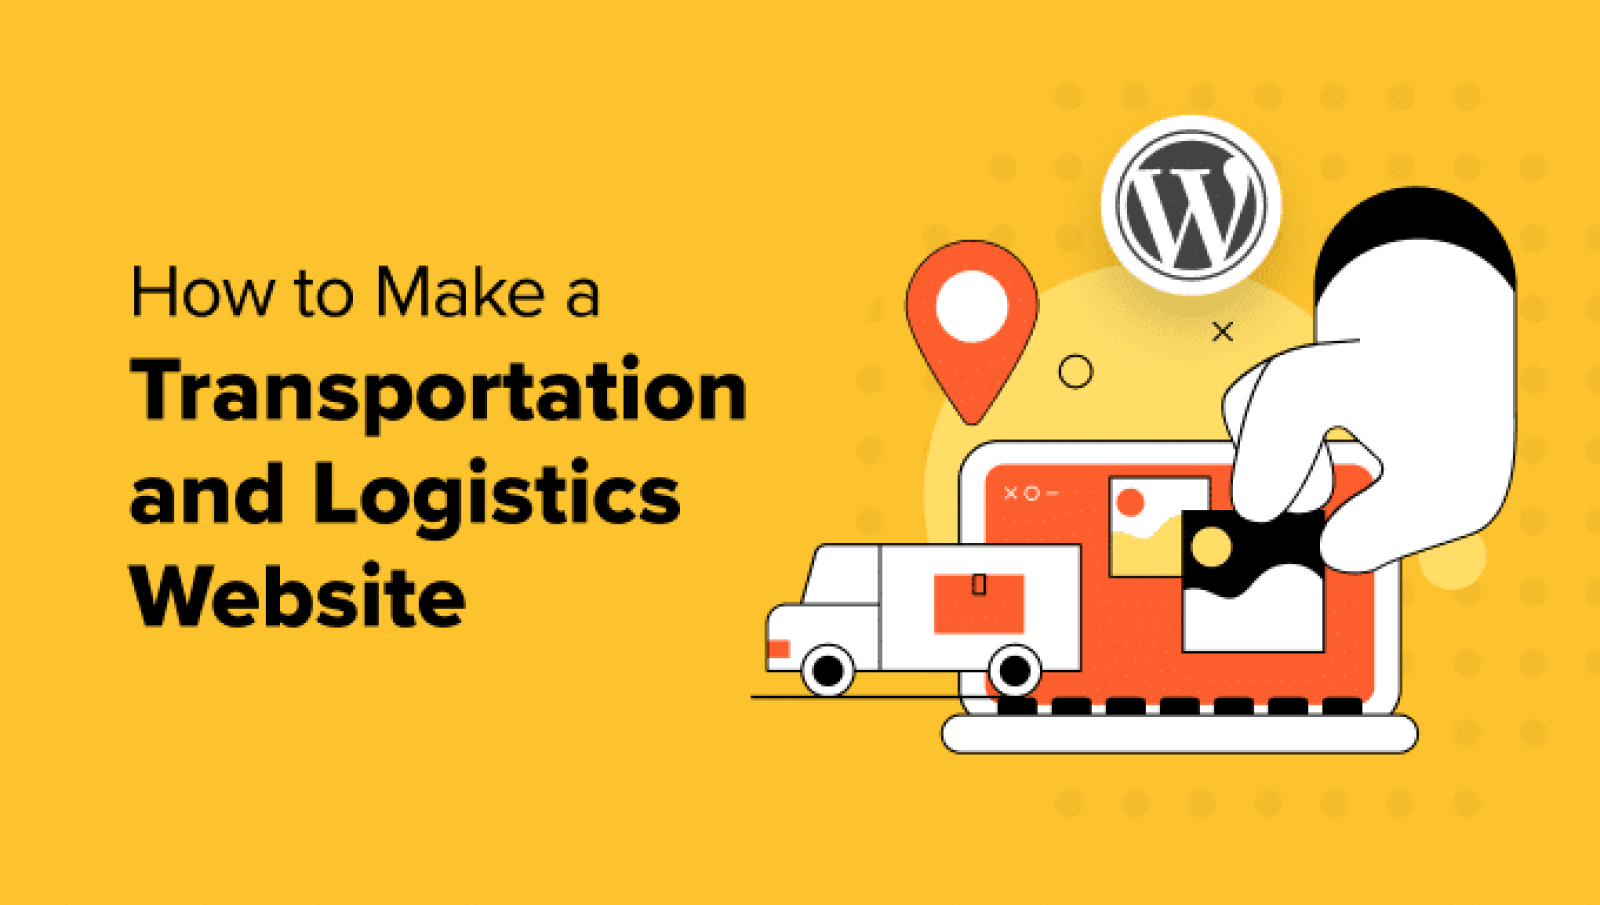 Tips on how to Make a Transportation and Logistics Web site in WordPress